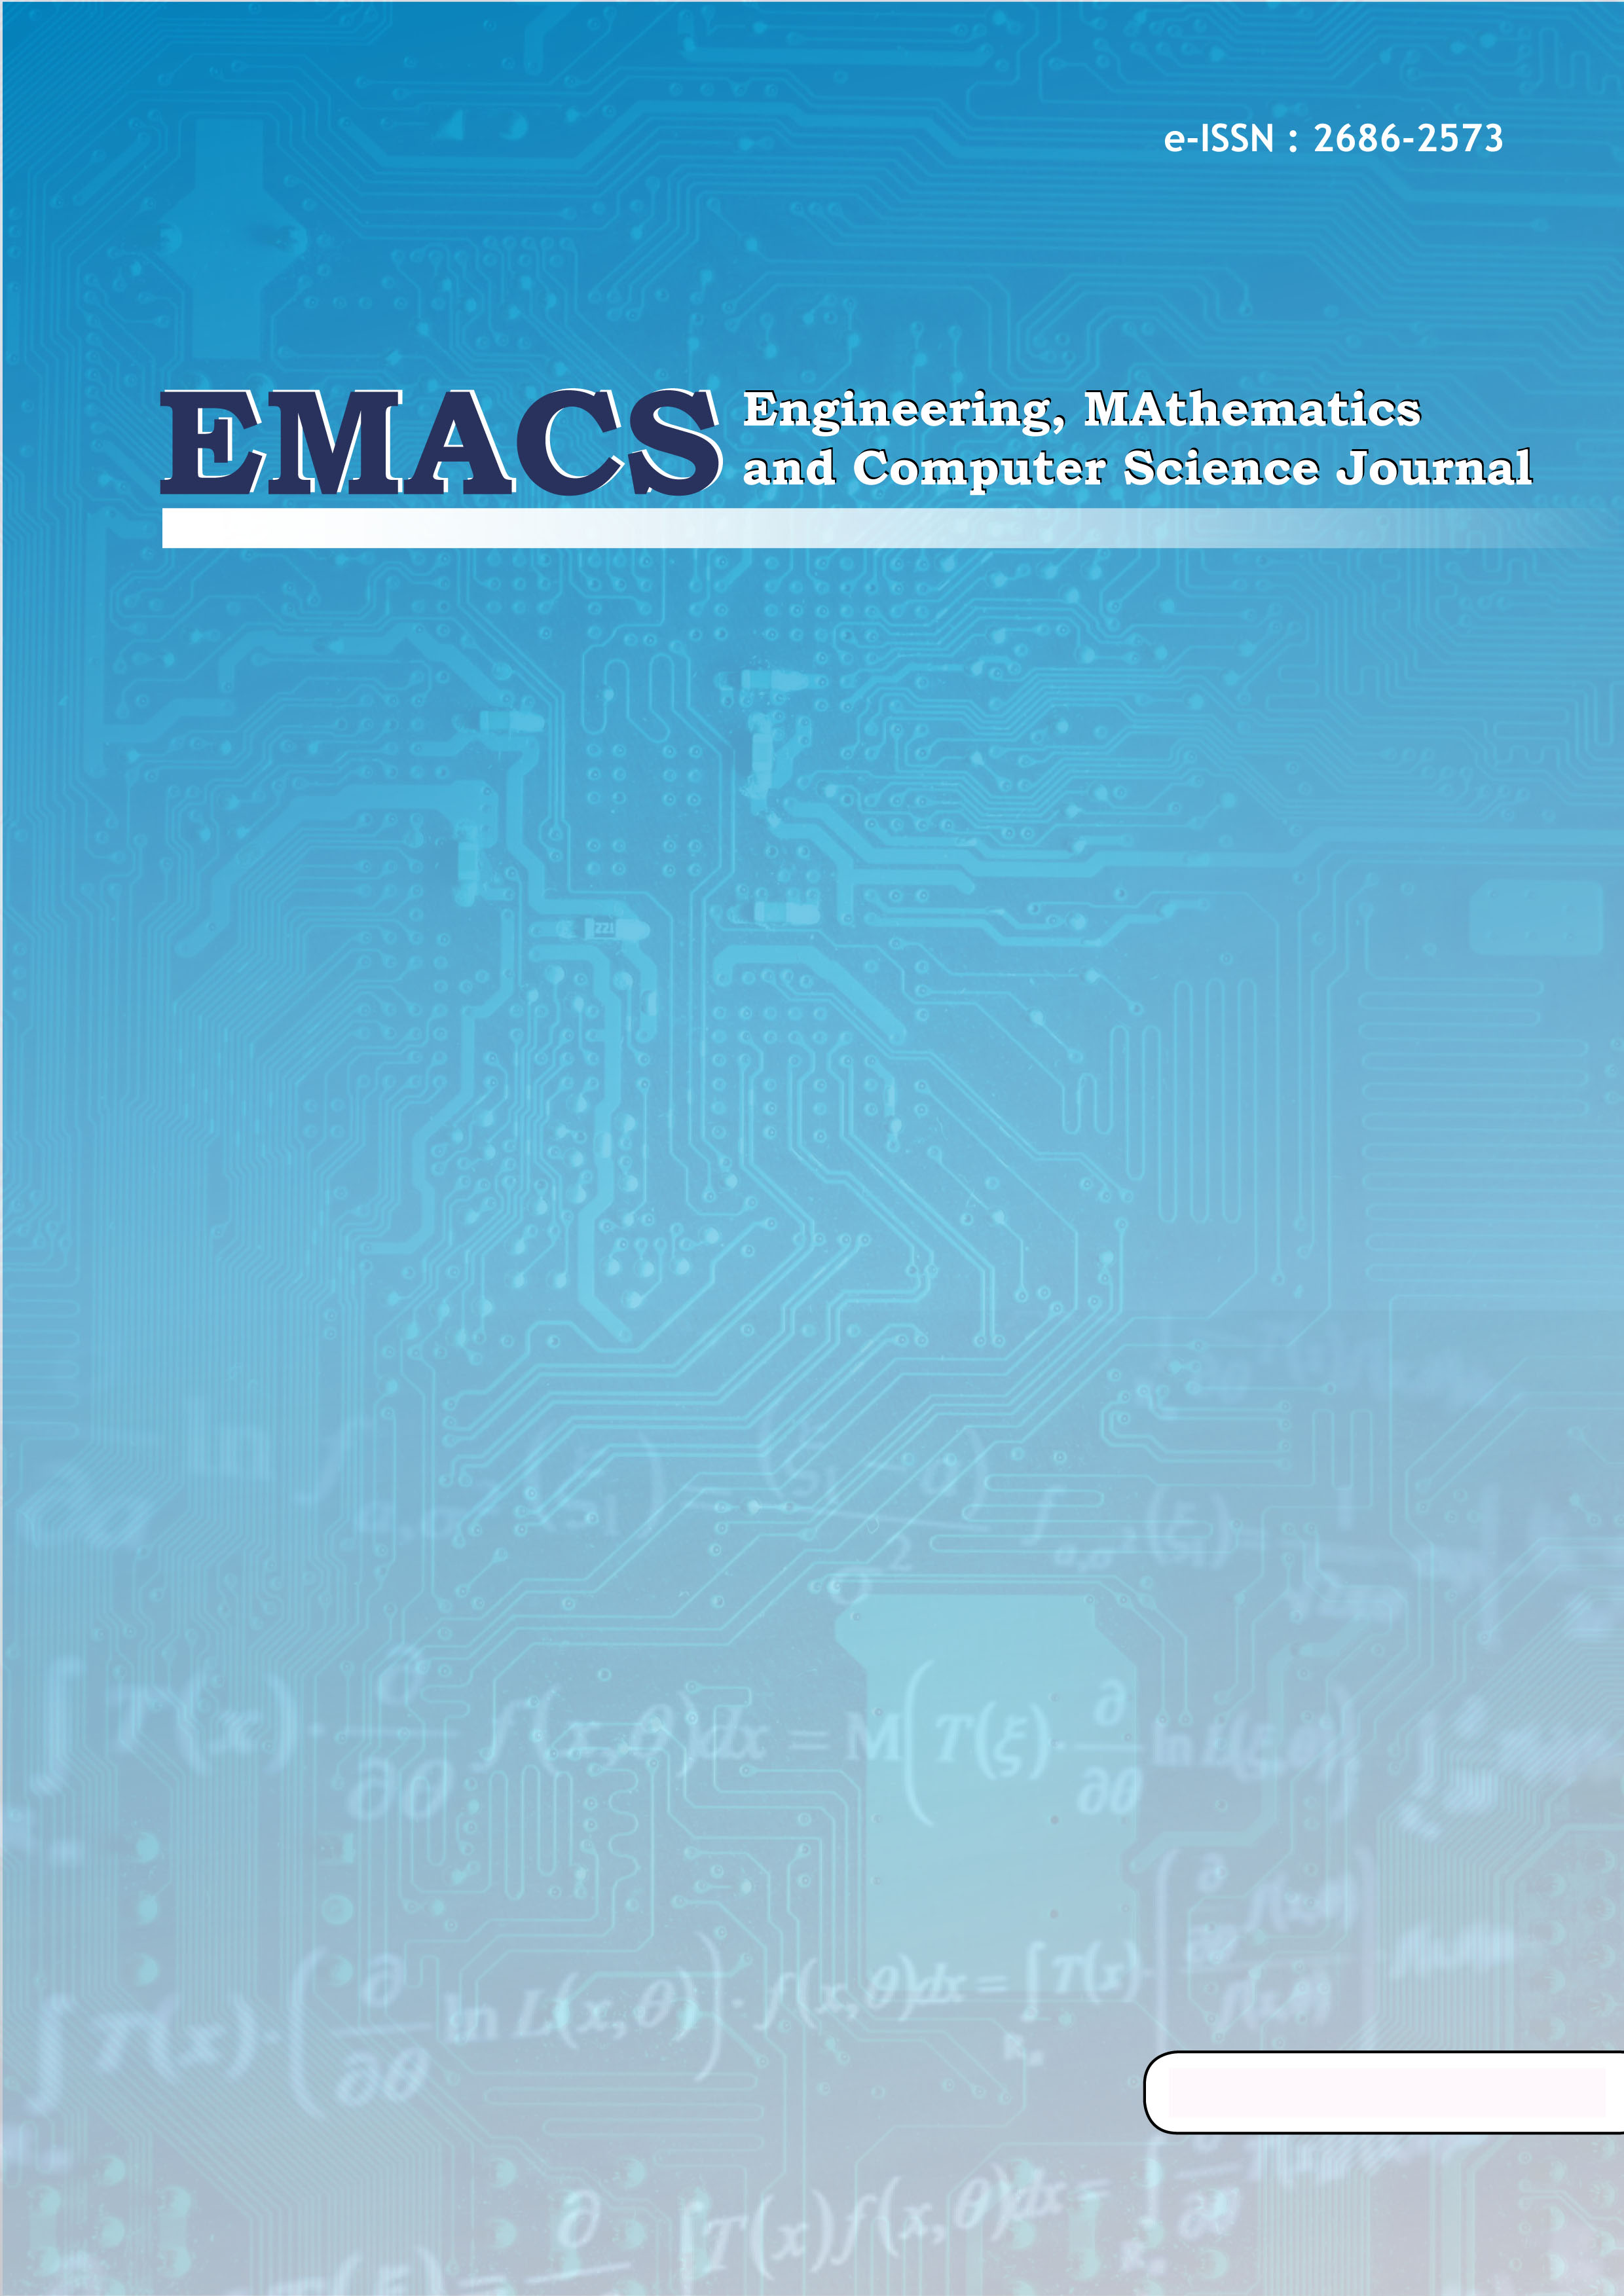 Engineering, MAthematics and Computer Science (EMACS) Journal